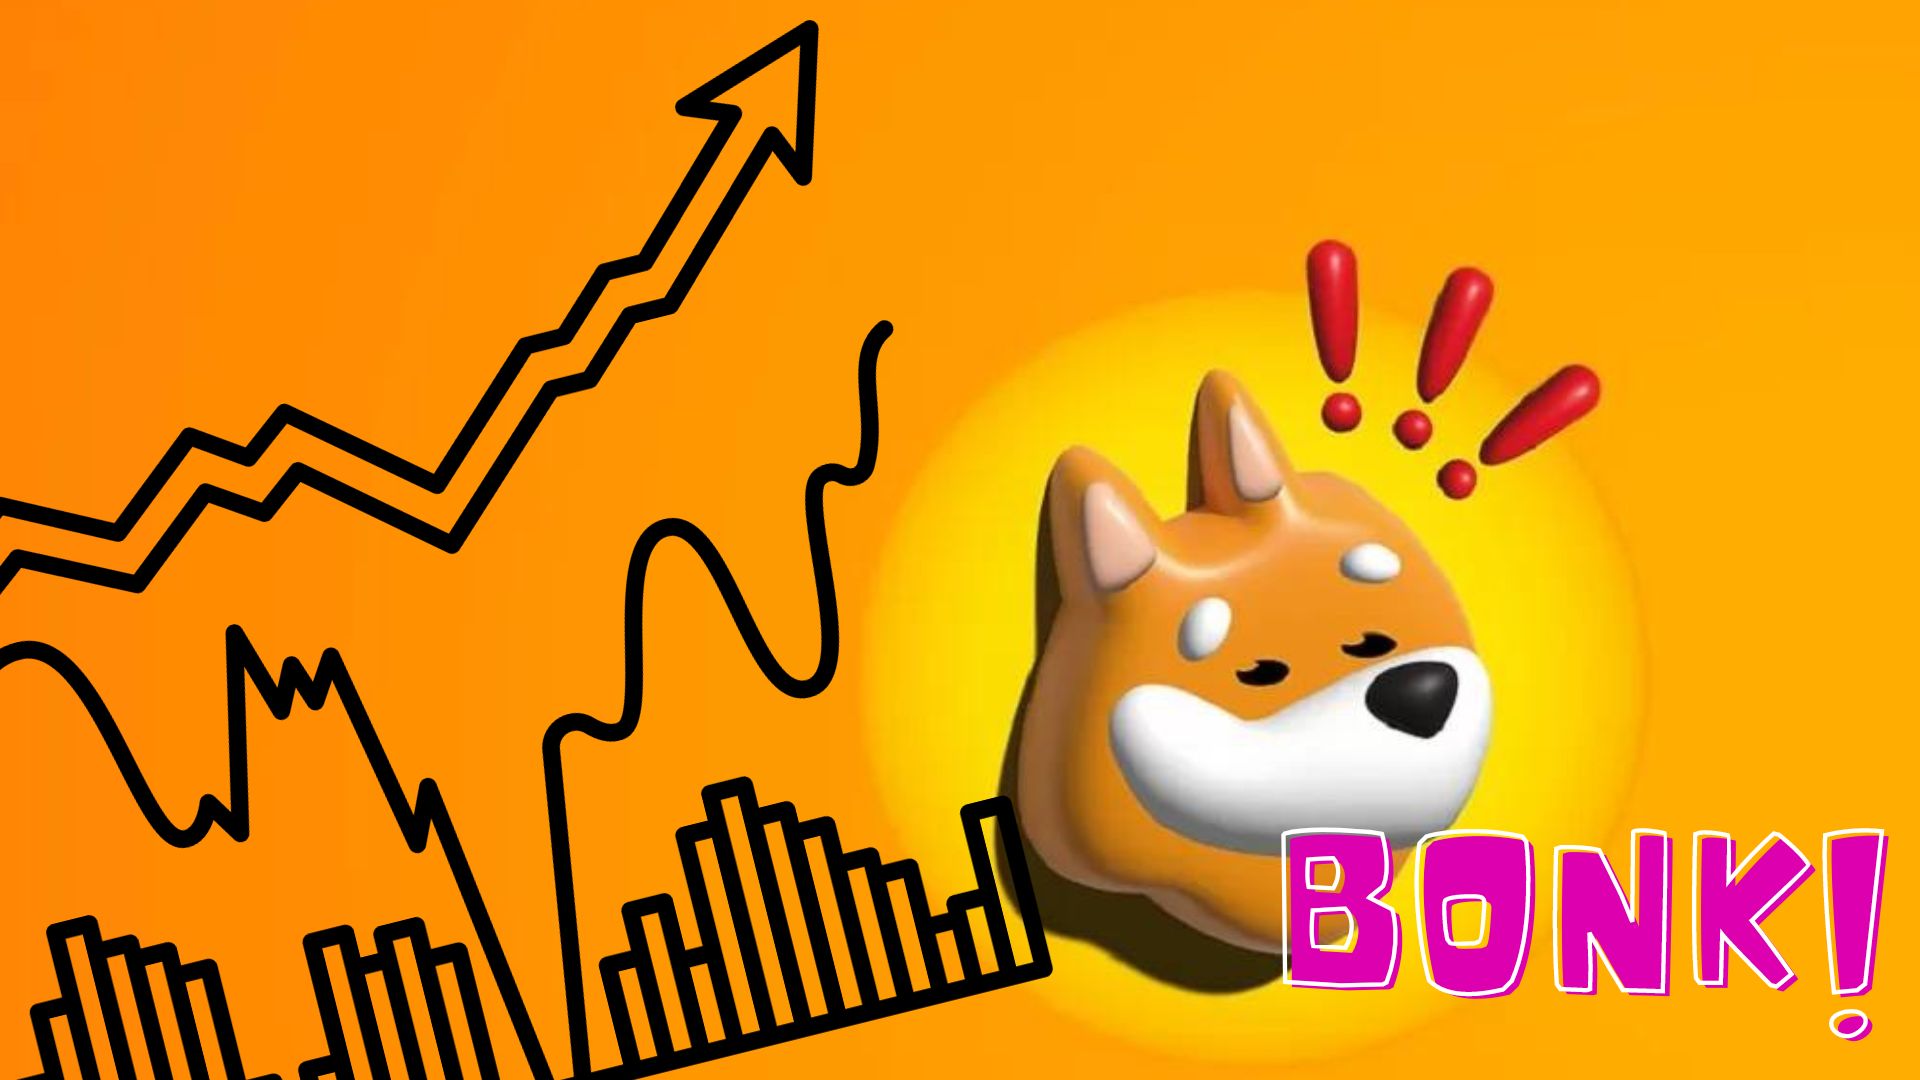 a picture of the Bonk Coin dog logo next to an upward trending stock chart, indicating the recent surge